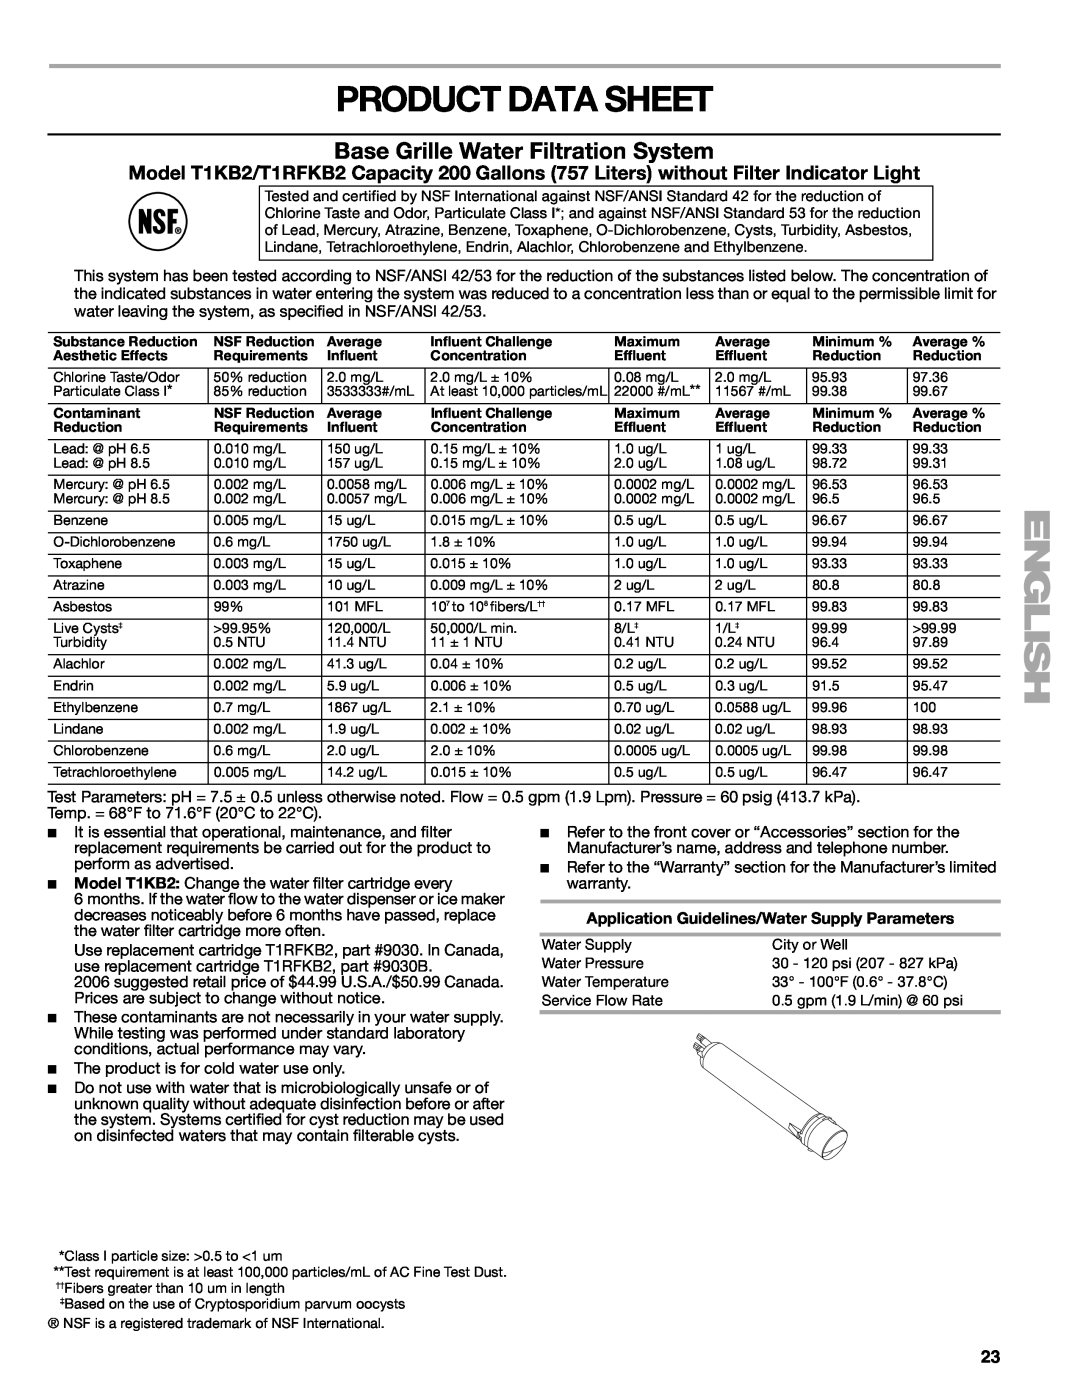 Sears T1KB2/T1RFKB2 manual Product Data Sheet, Base Grille Water Filtration System 